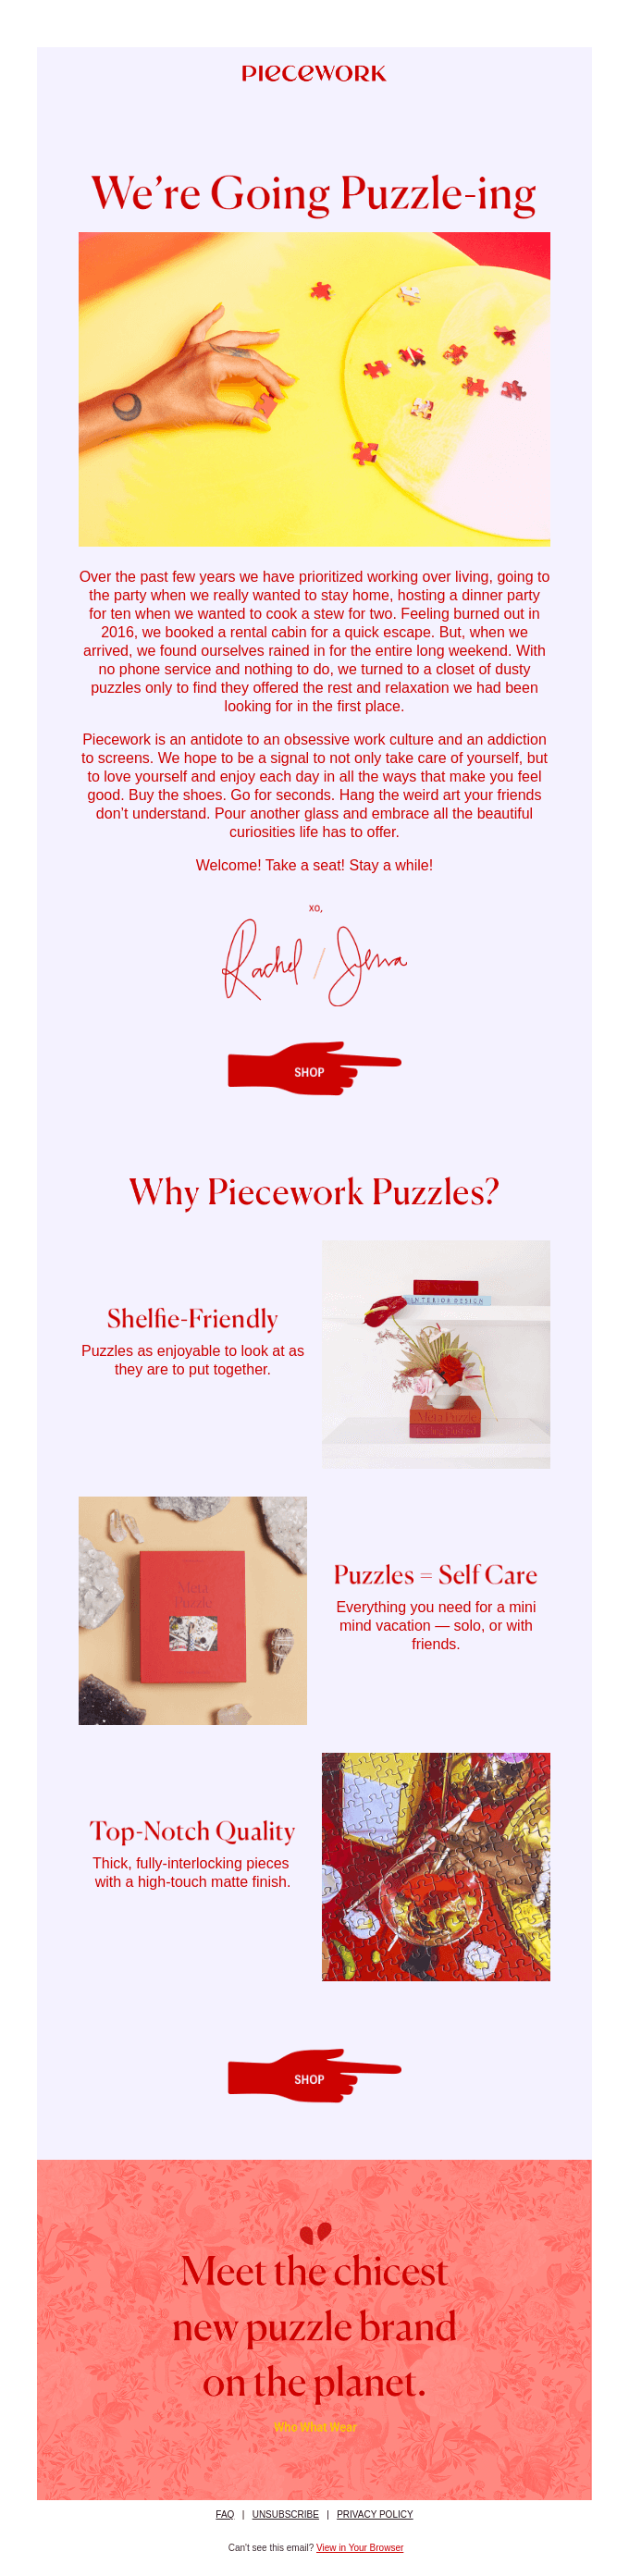 Welcome to the Piecework family!